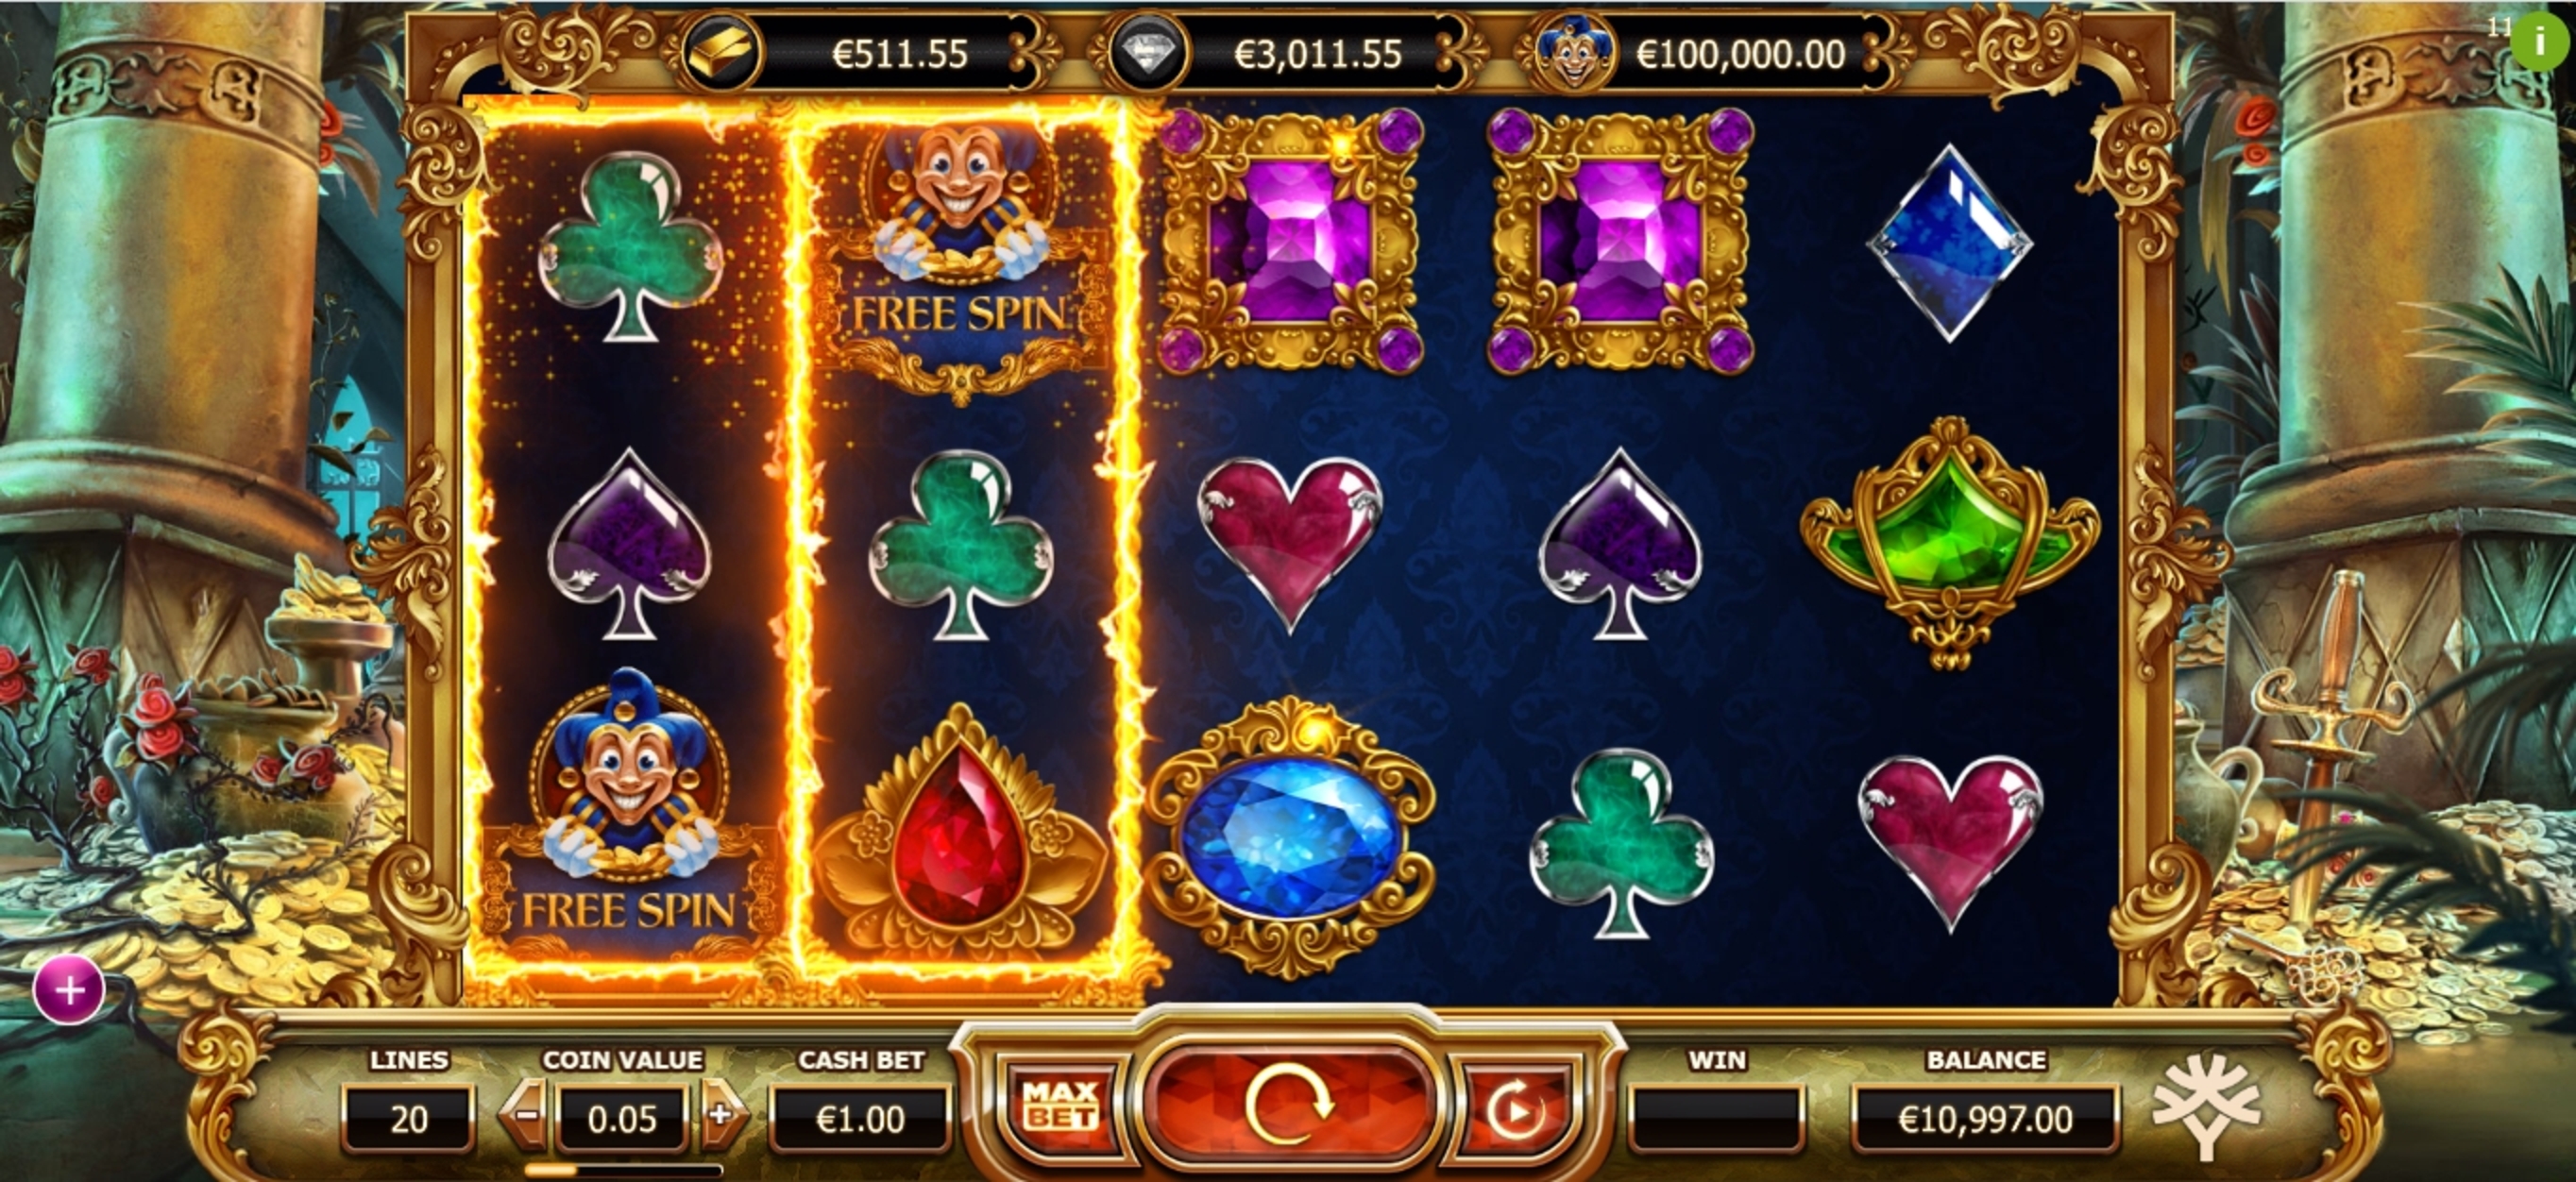 Win Money in Empire Fortune Free Slot Game by Yggdrasil Gaming